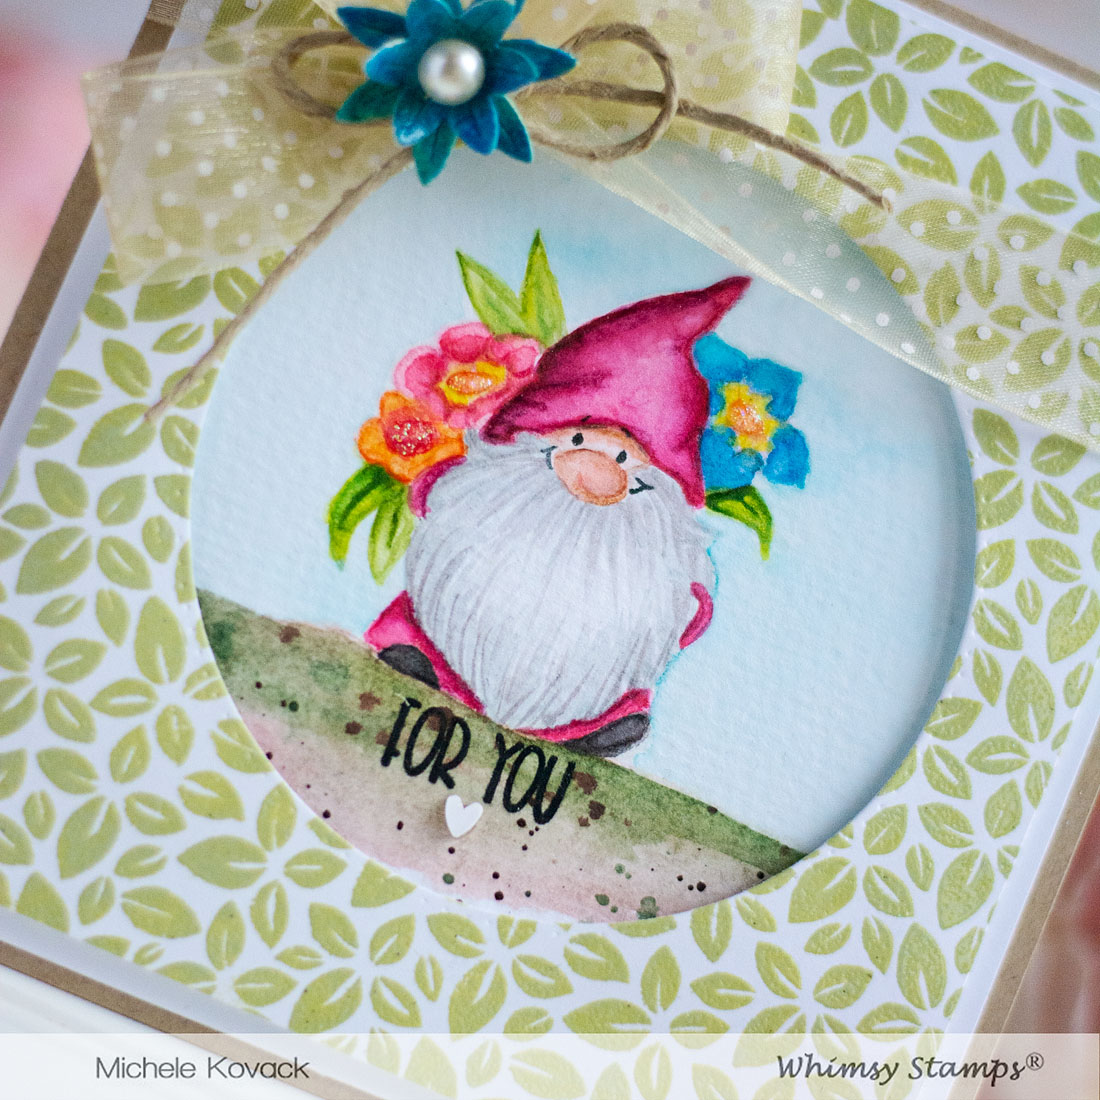 Thoughts of a Cardmaking Scrapbooker!